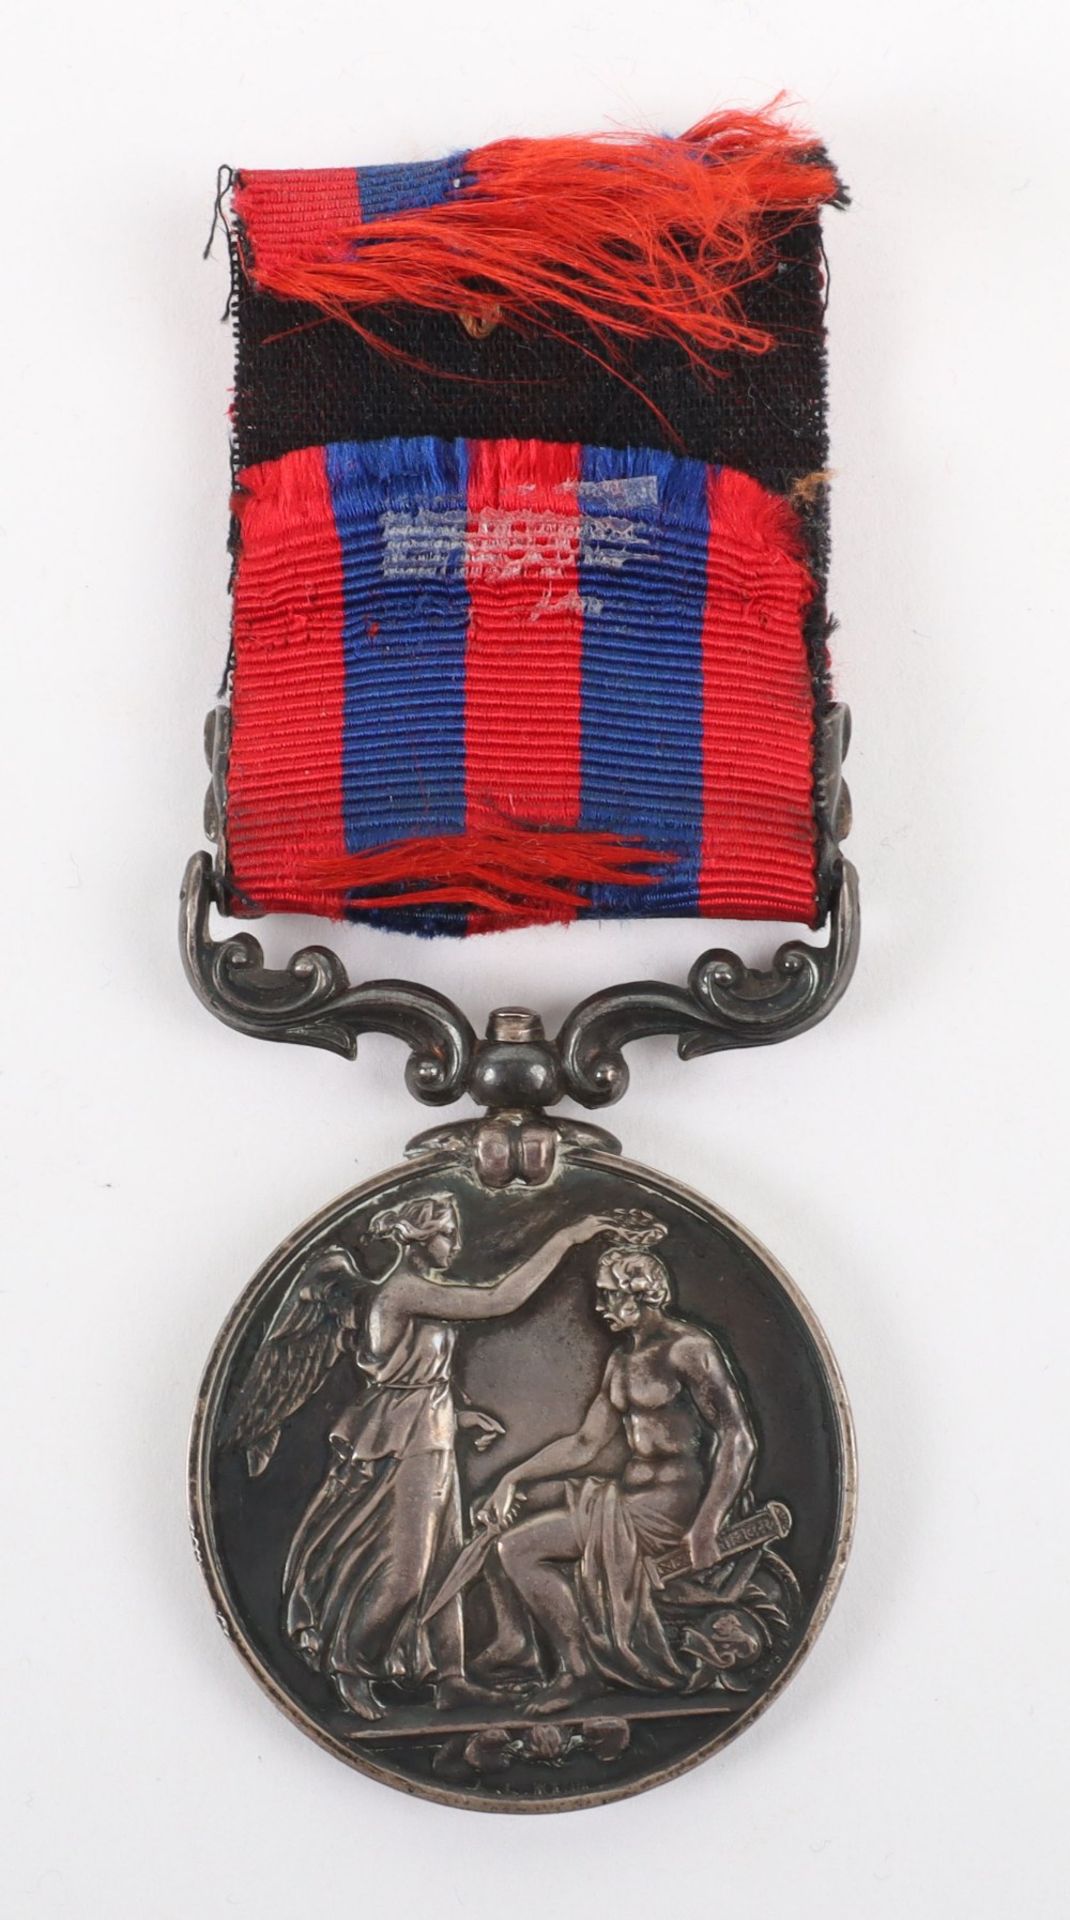 India General Service medal 1854-95 For Service in the 1863 Umbeyla Campaign - Image 2 of 4